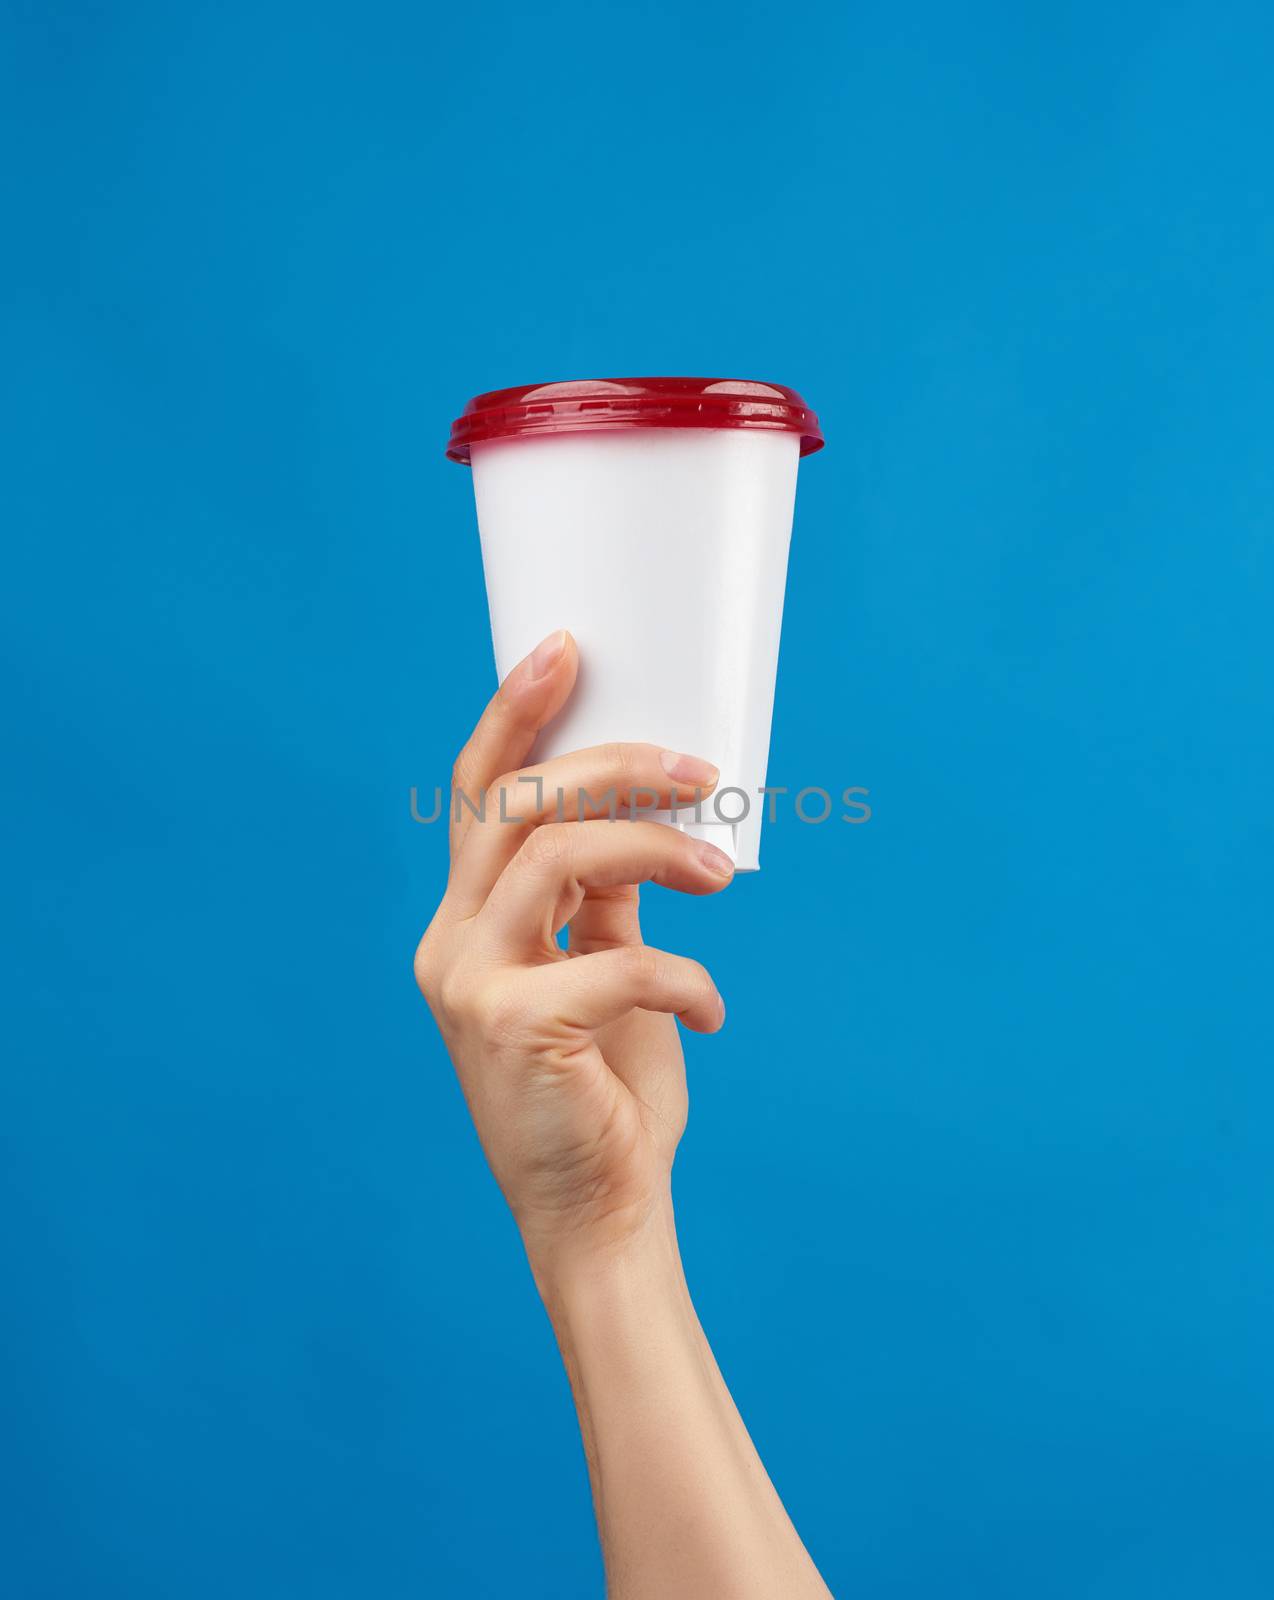 female hand holds a disposable white glass with a red cap on a b by ndanko